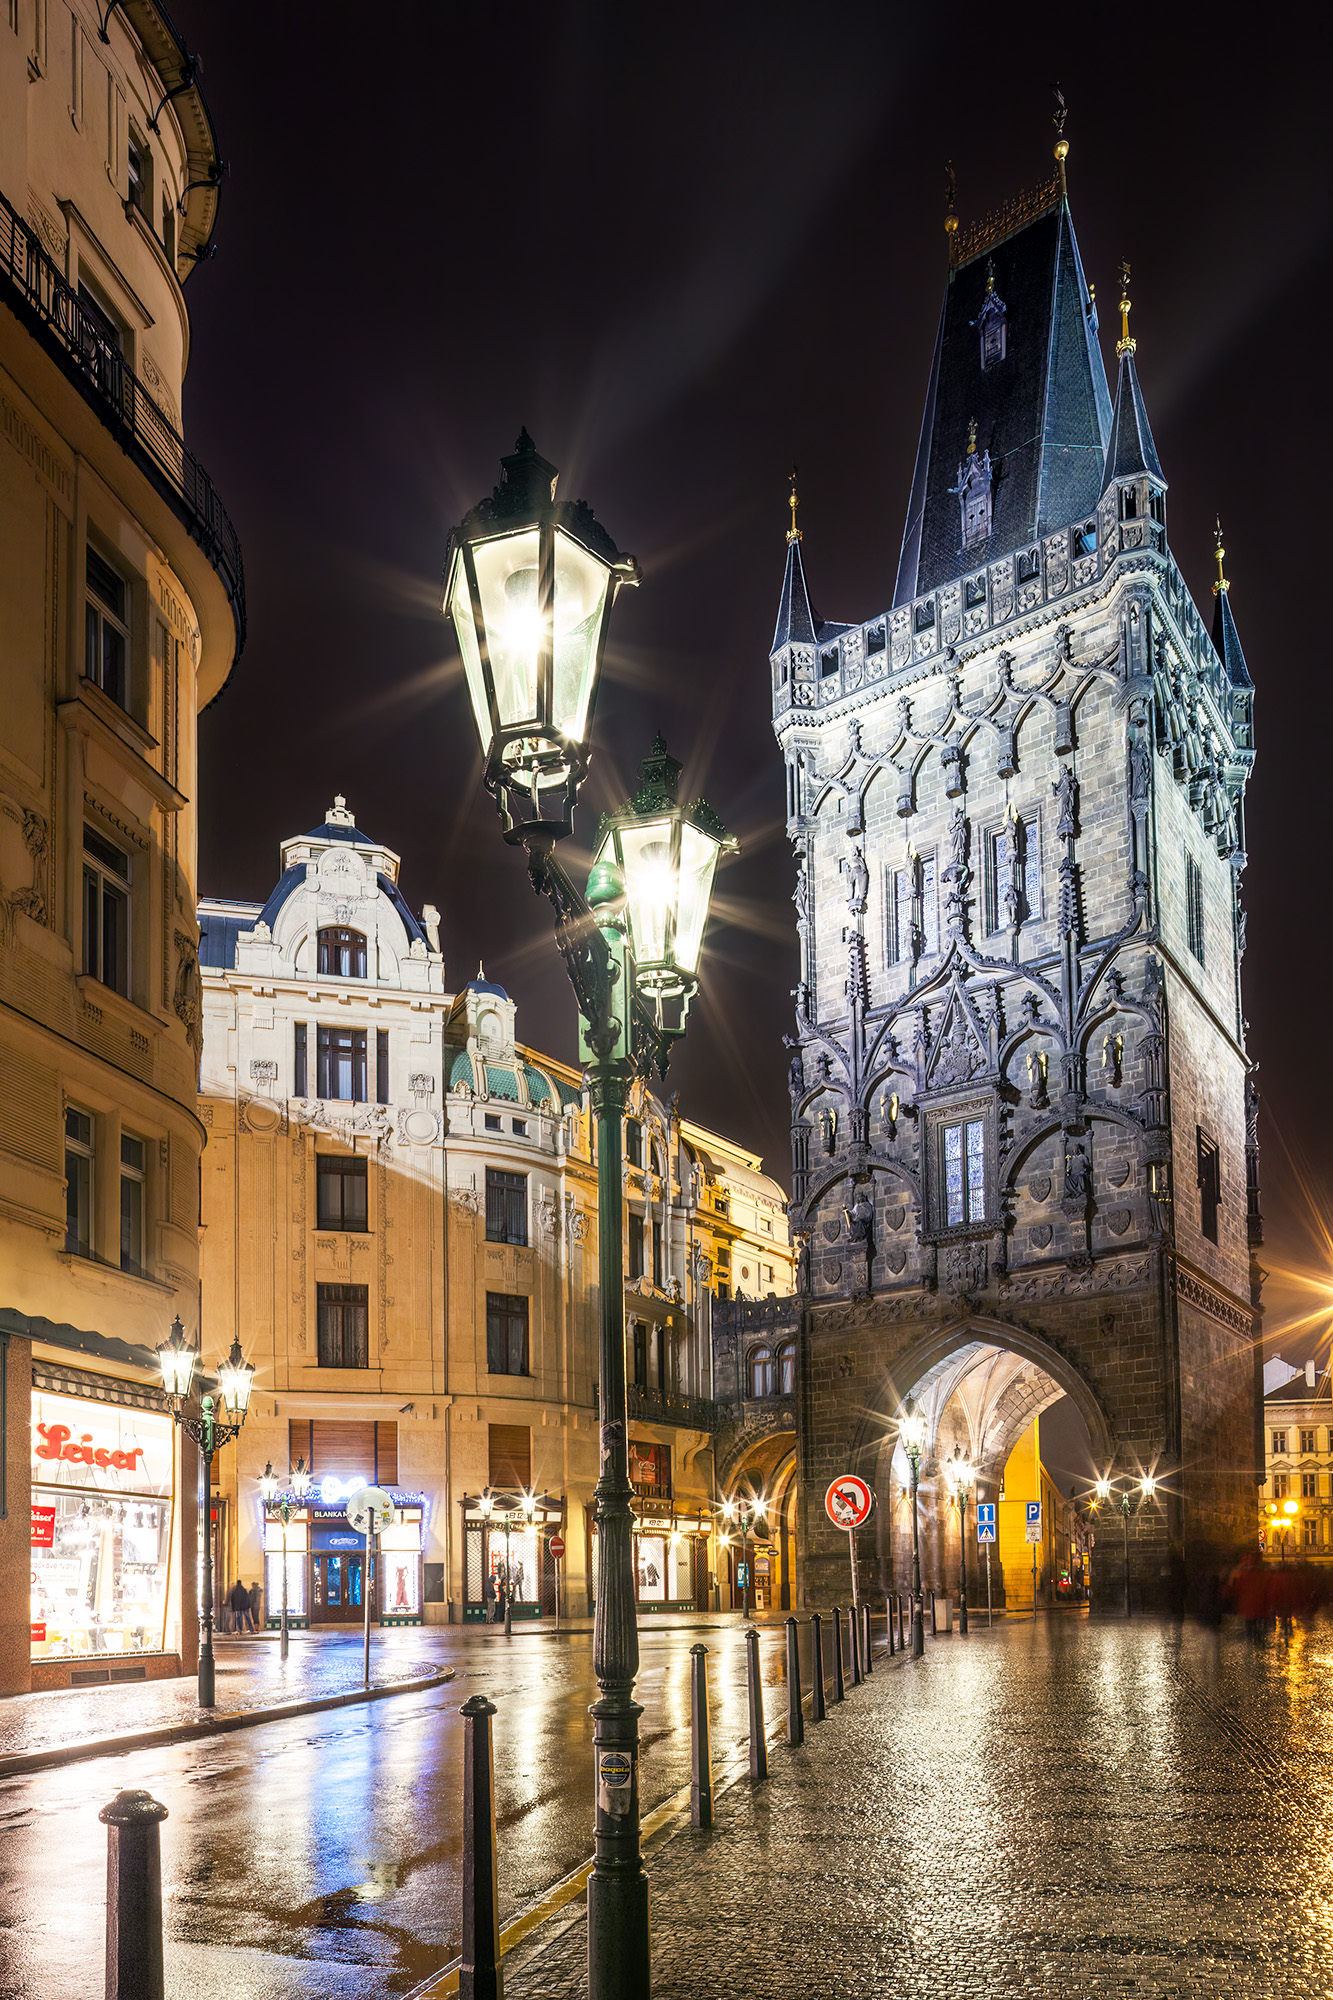 In the heart of Prague, under a drizzling rain, the historic Powder Tower stands as a sentinel to bygone eras. This 15th-century...